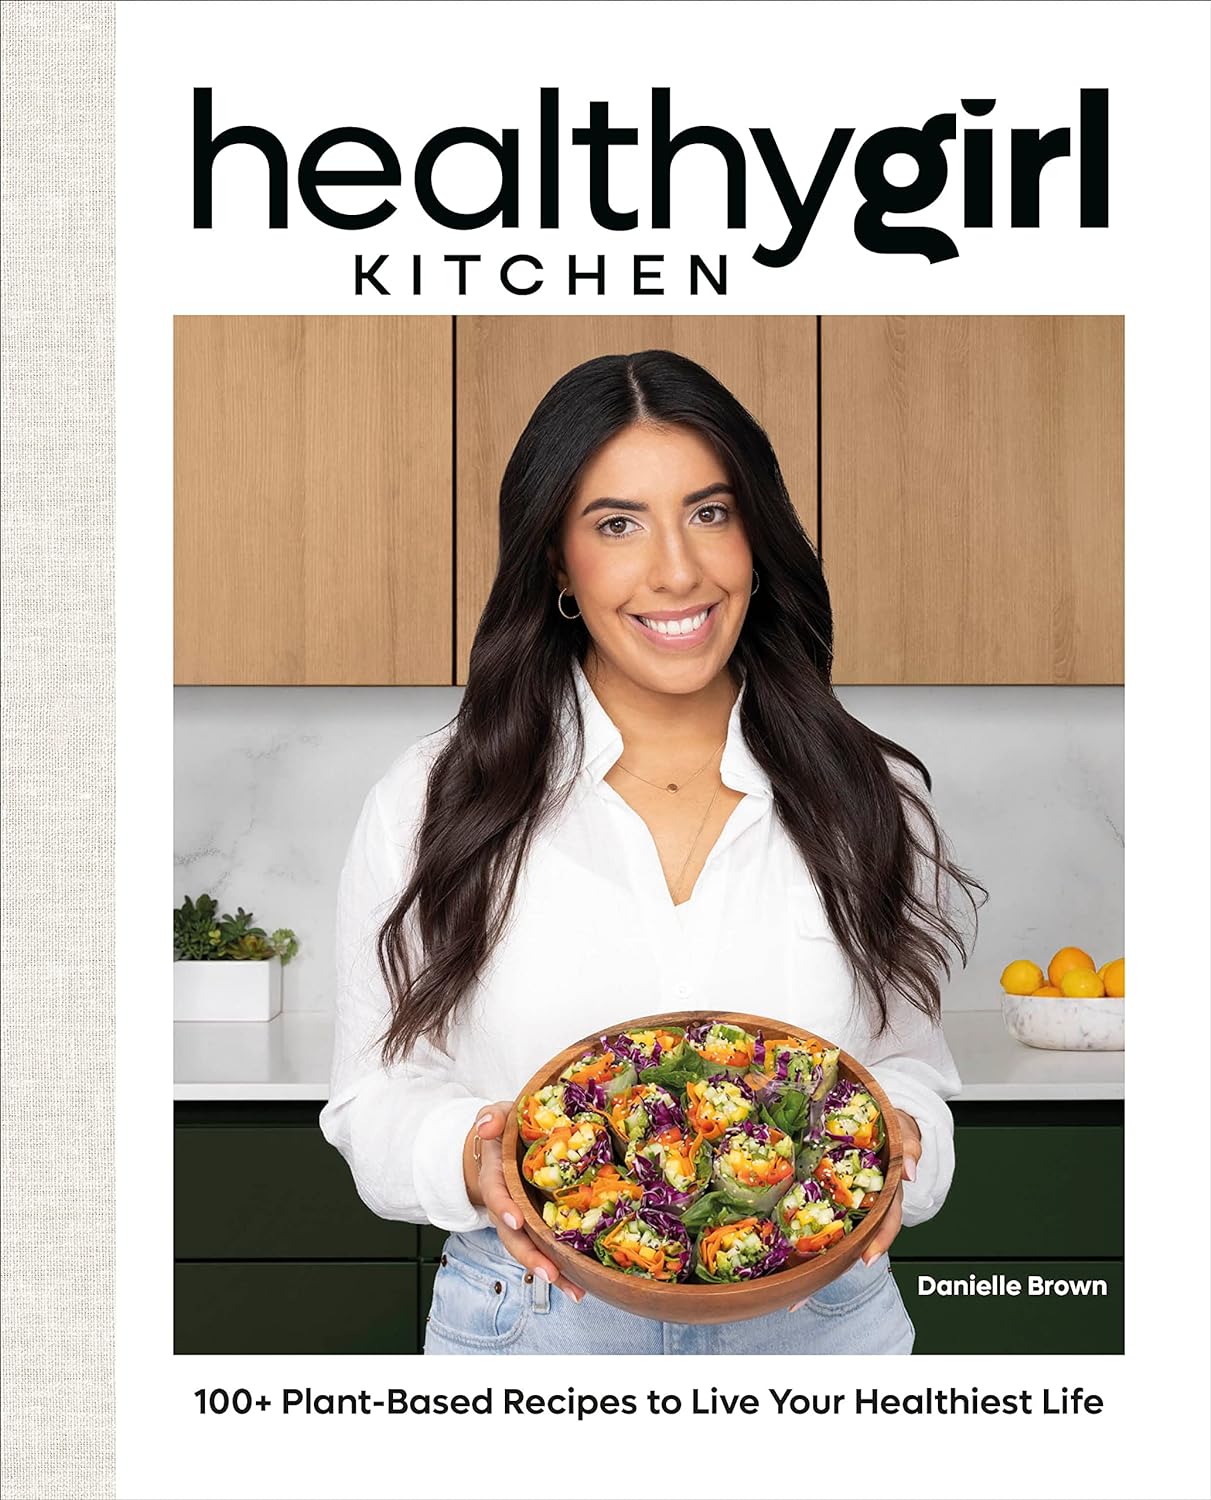 HealthyGirl Kitchen: 100+ Plant-Based Recipes to Live Your Healthiest Life     Hardcover – May 16, 2023